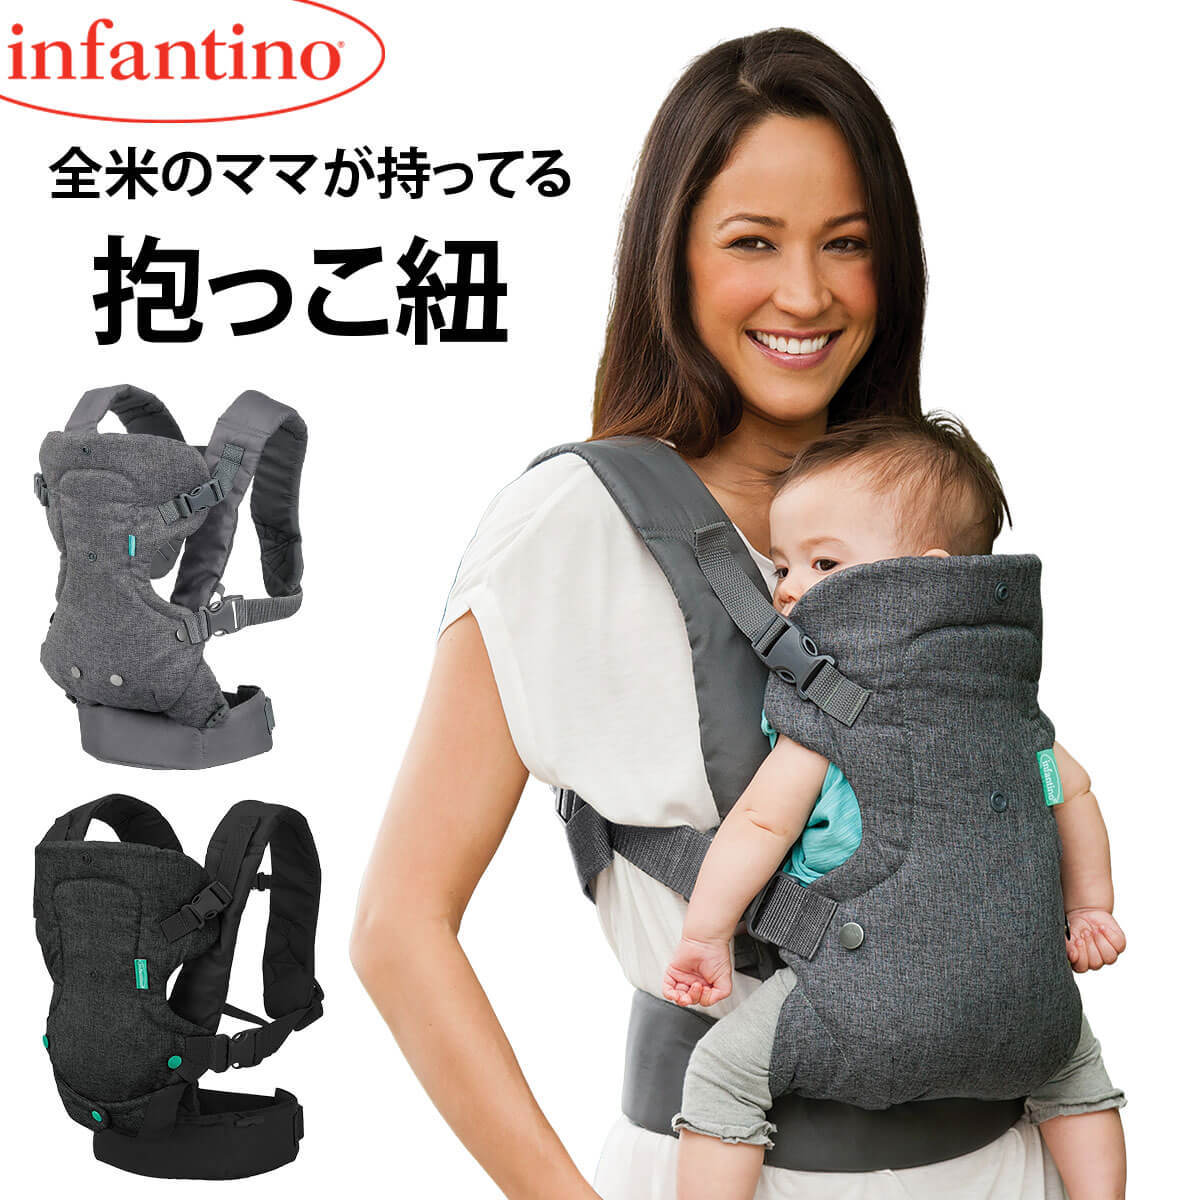 [ all rice No.1 brand ] baby sling front position baby carrier ... string baby backpack compact storage baby carrier front direction easy ... cord back position baby carrier infantino